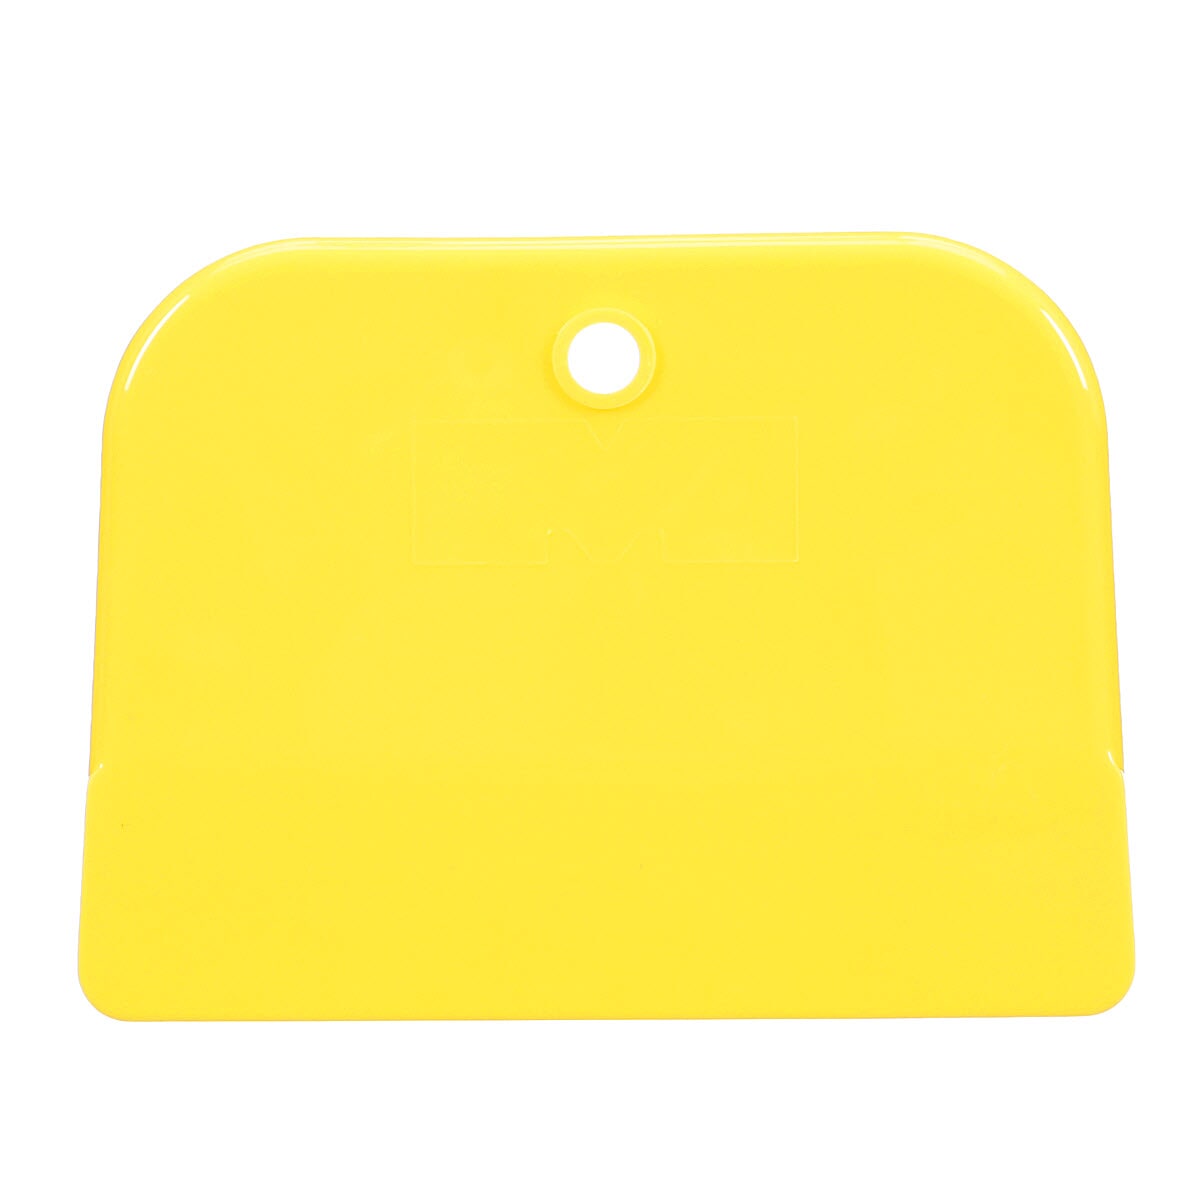 3M 7100143341 Spreader, 4 in W, For Use With Fiberglass Fillers, Finishing Putties, Resins and Spreading Body, Plastic, Yellow